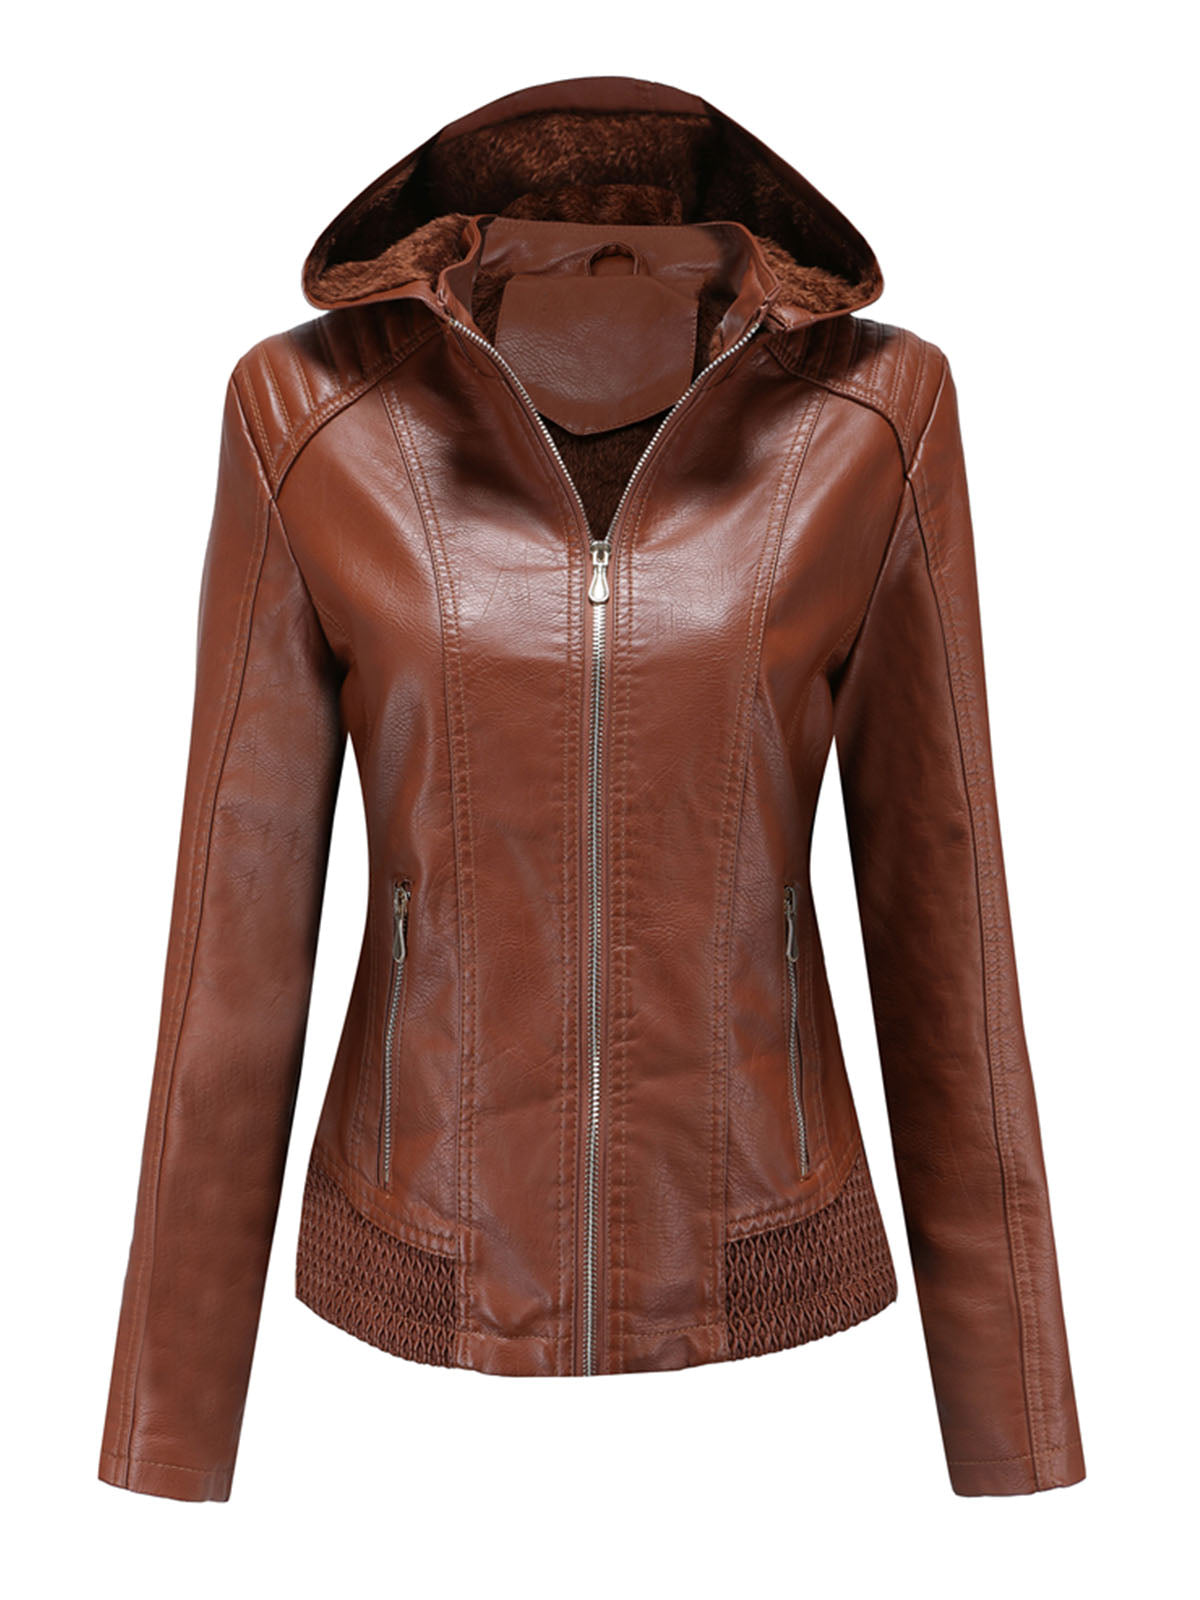 Street Winter Outfits Long Sleeve PU Leather With faux fur lined Warm Jacket For Women